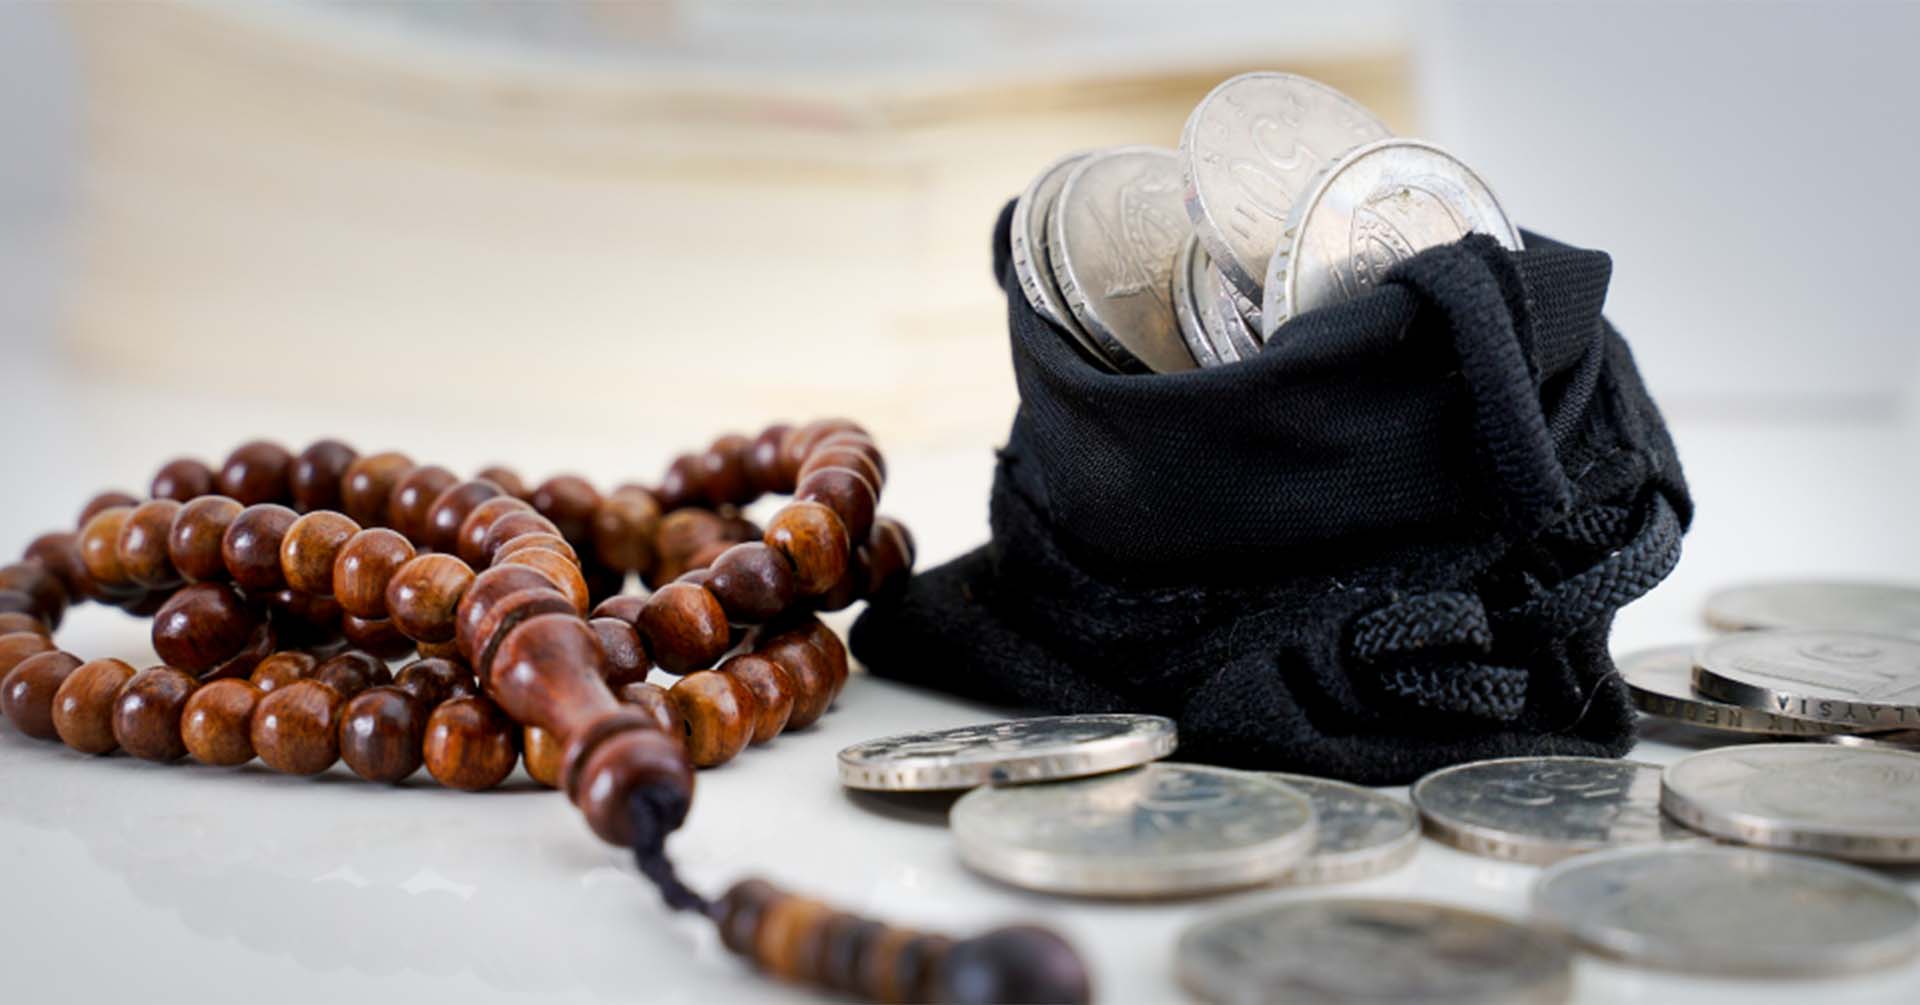 brown prayer beads (tasbih) and black pouch of silver coins charity in islam